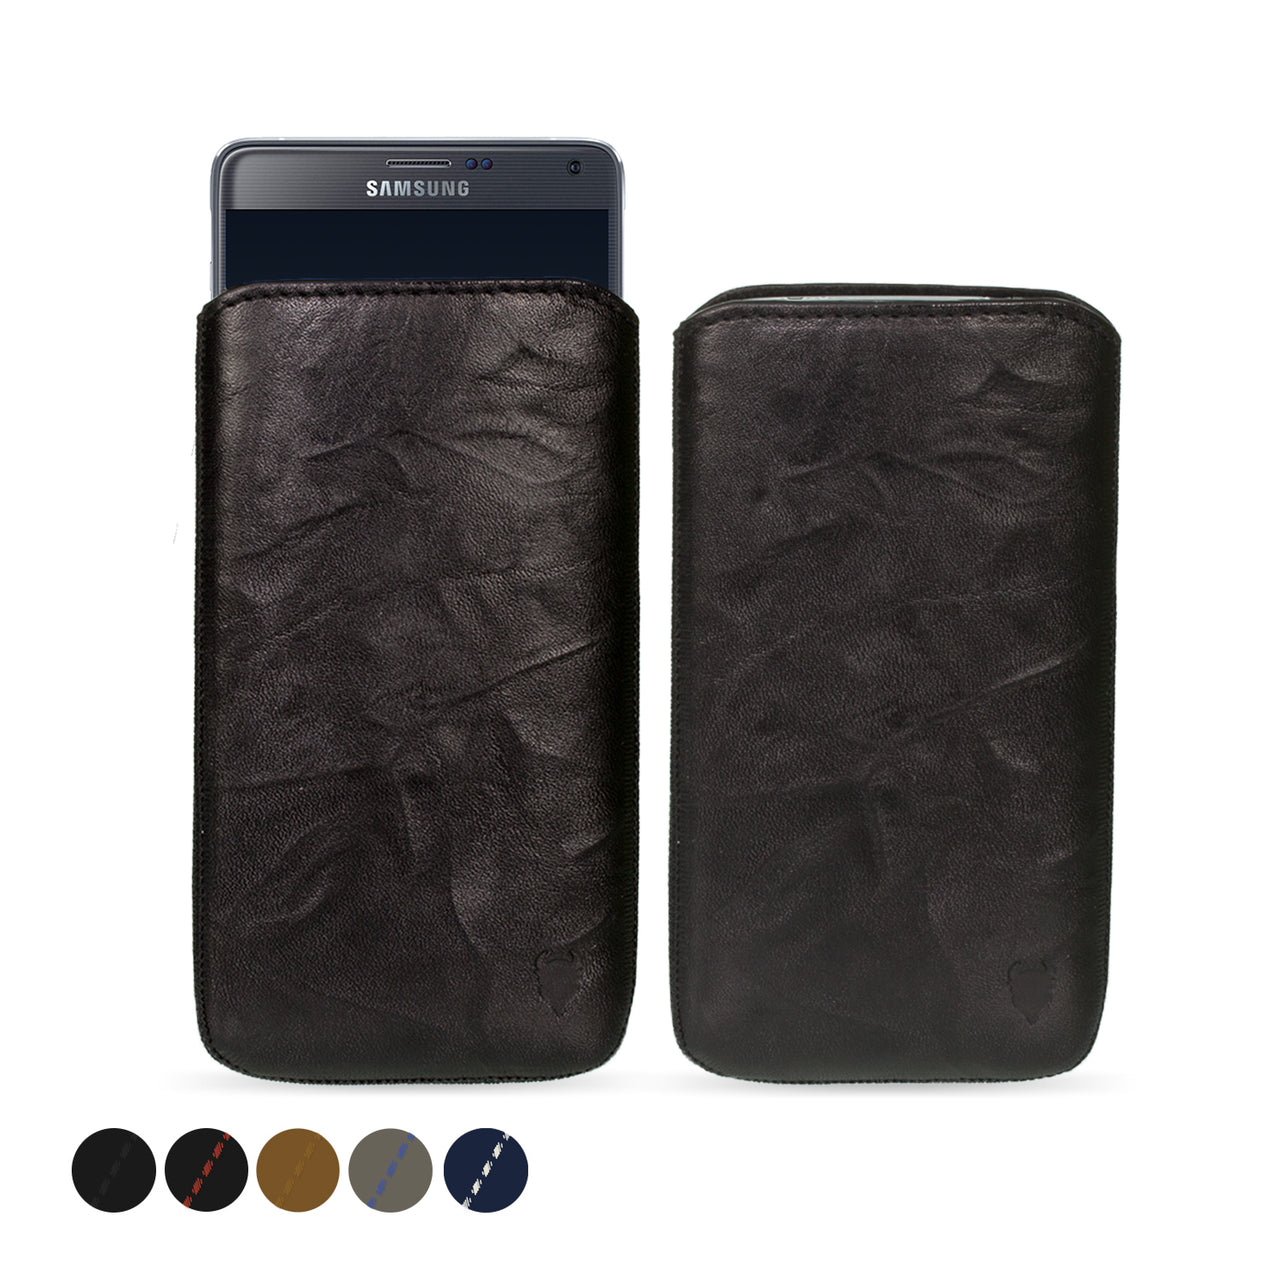 Samsung Galaxy Note 4 Genuine Leather Pouch Sleeve Case | Artisanpouch